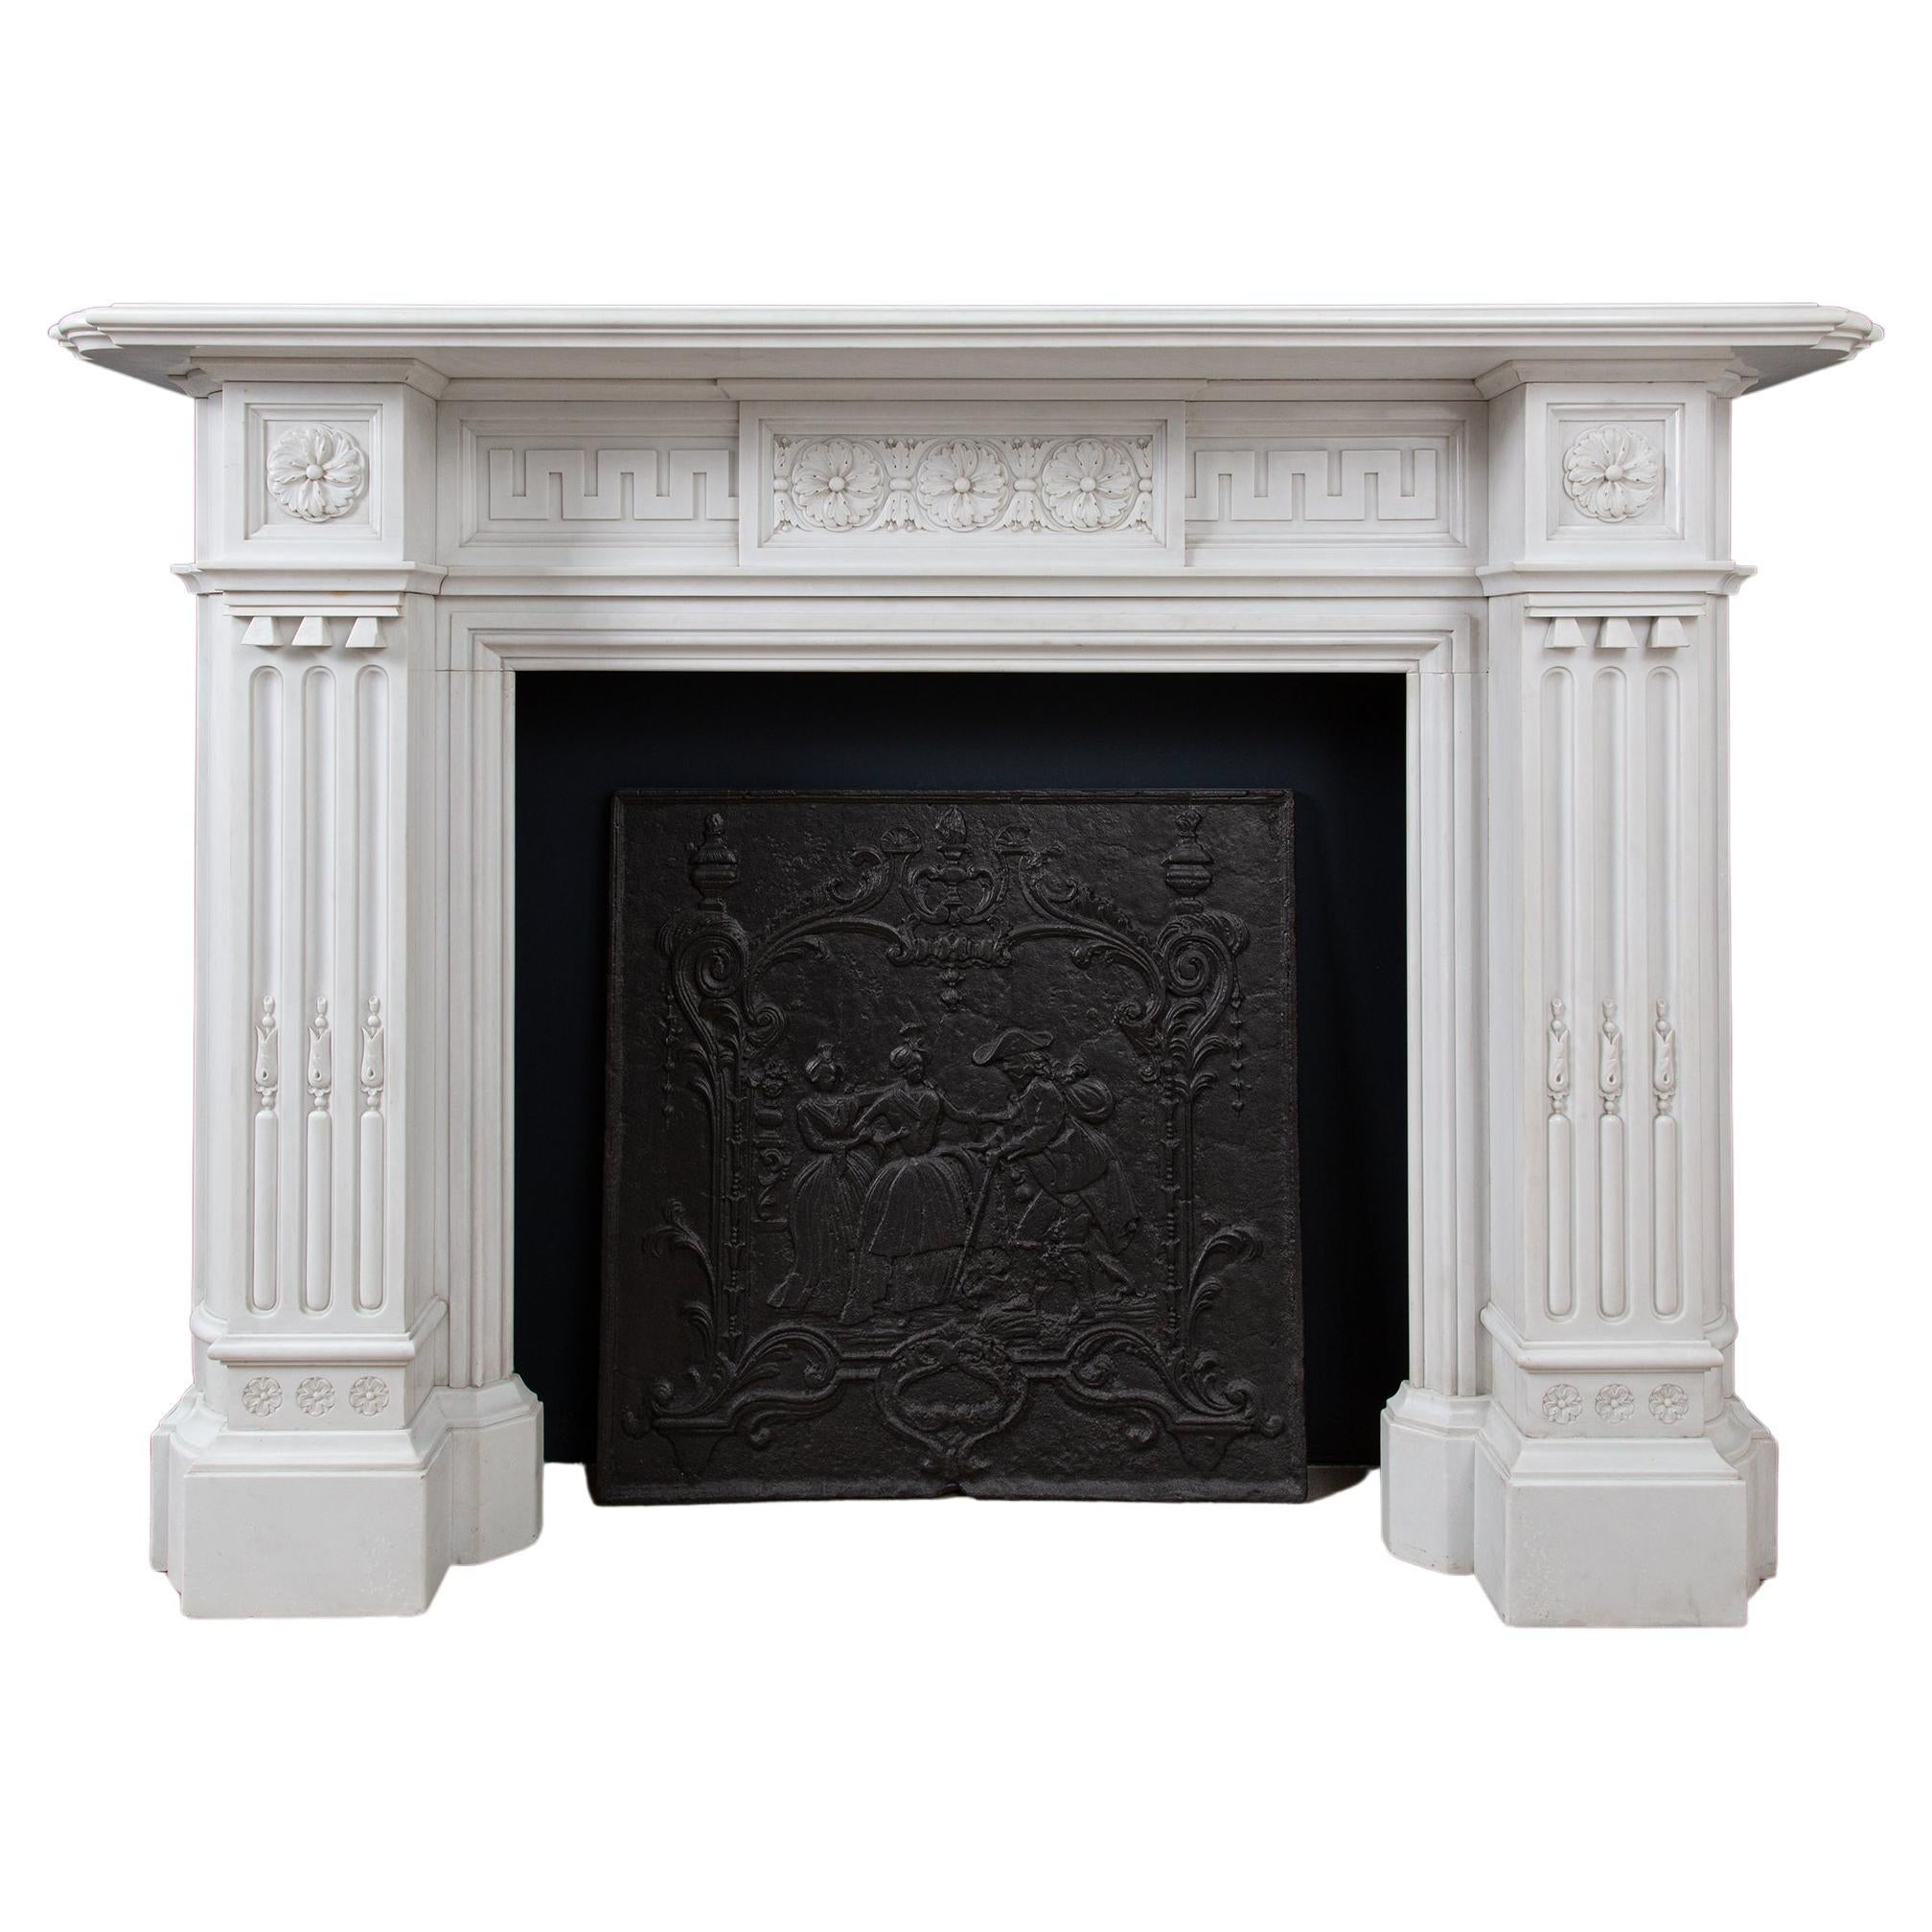 Very Rare Exceptional Statuary Clear White Marble Antique Fireplace Surround